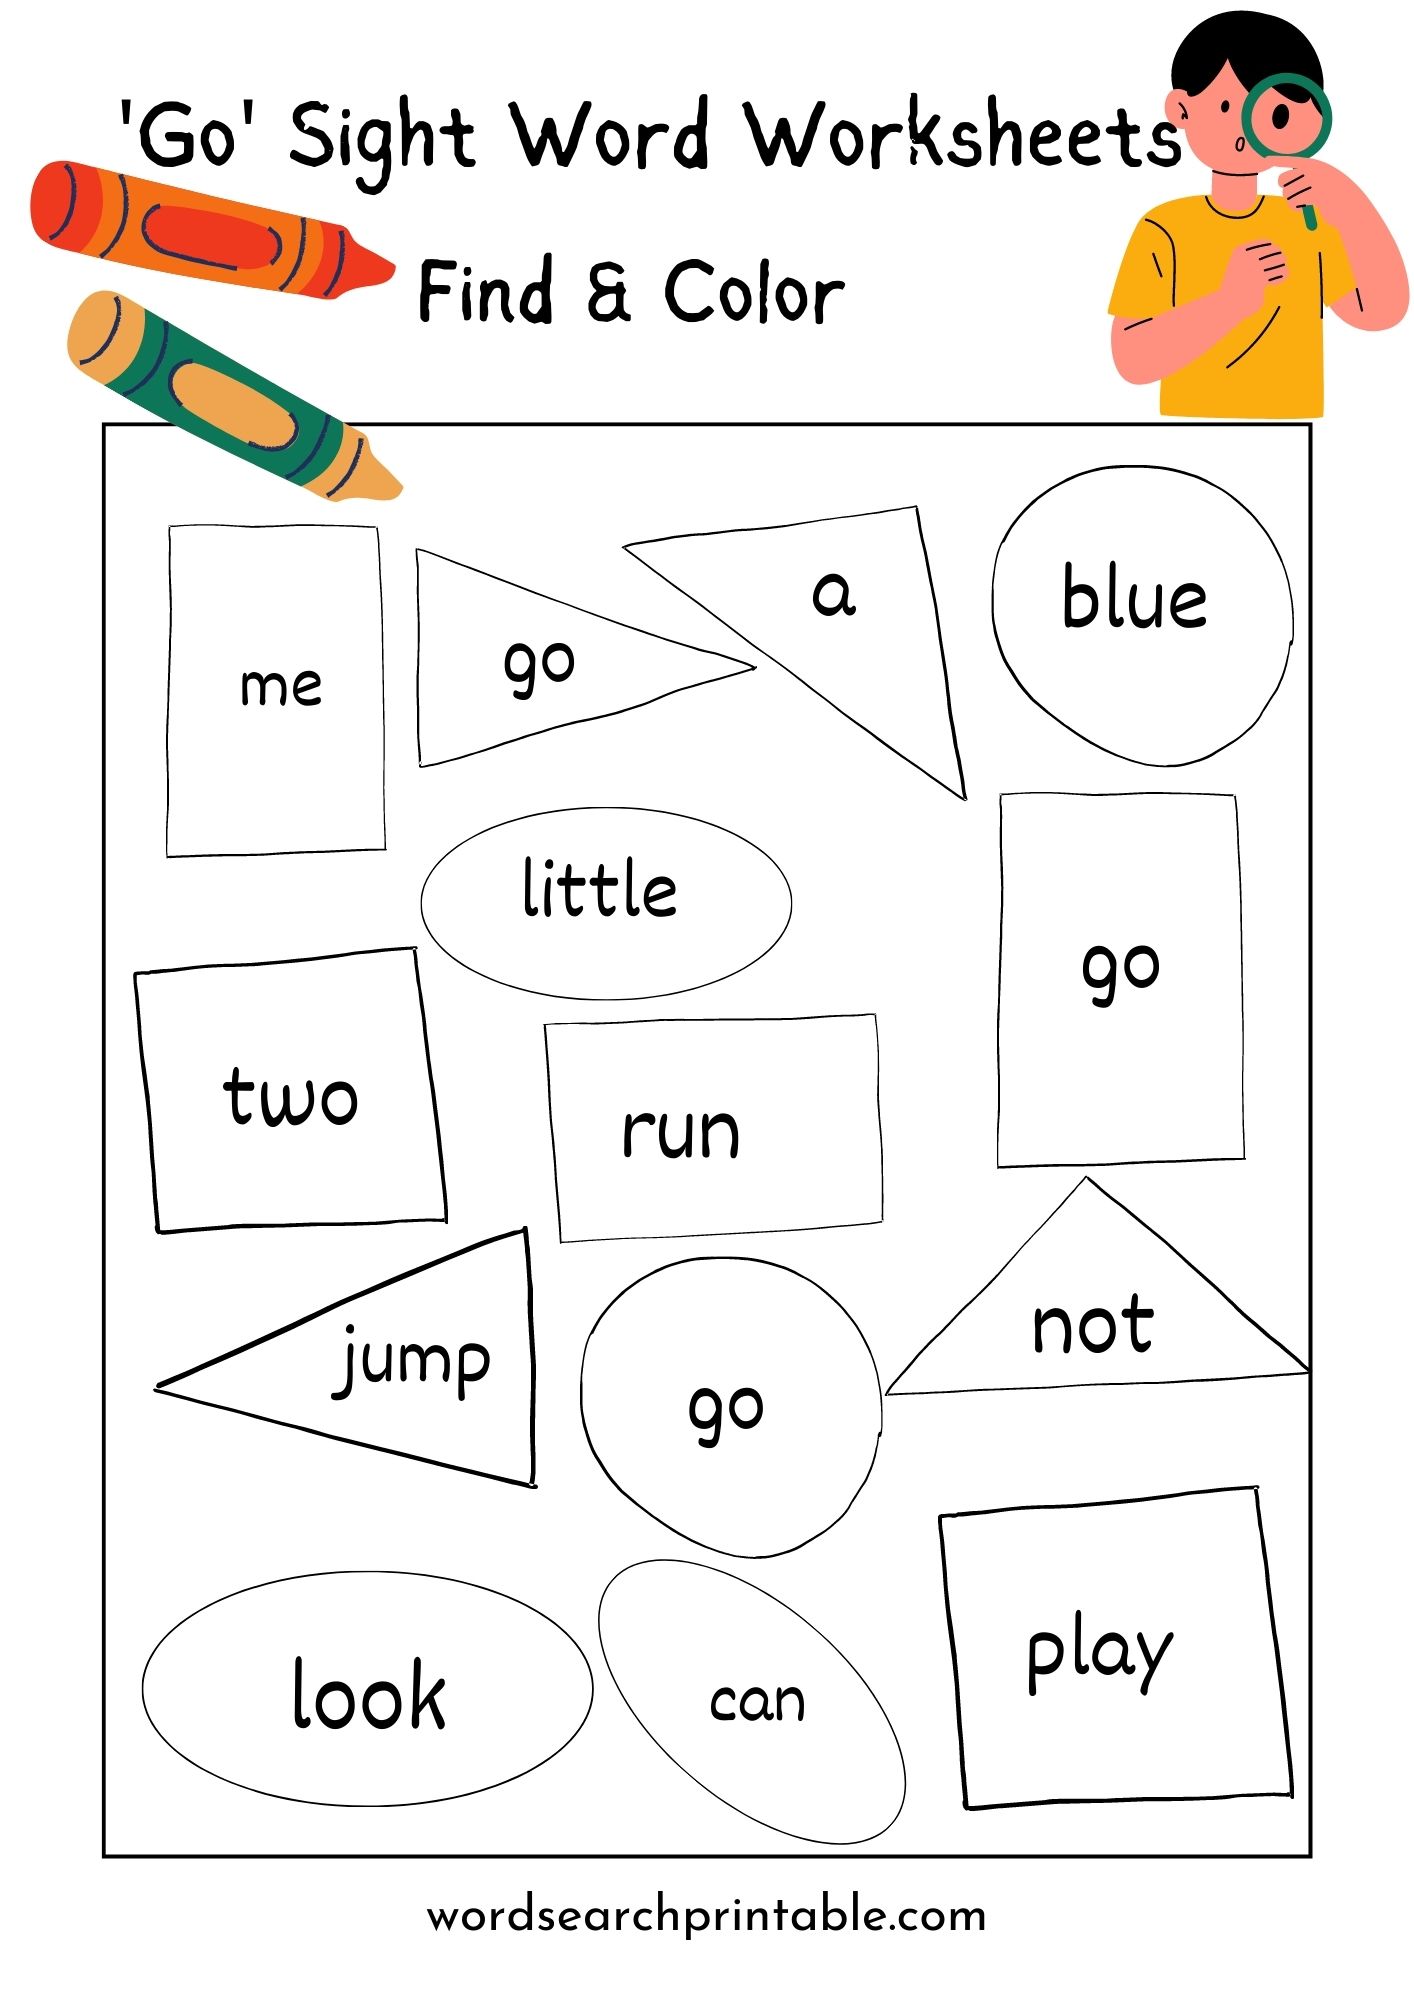 Find sight word Go and Color the geometric shape